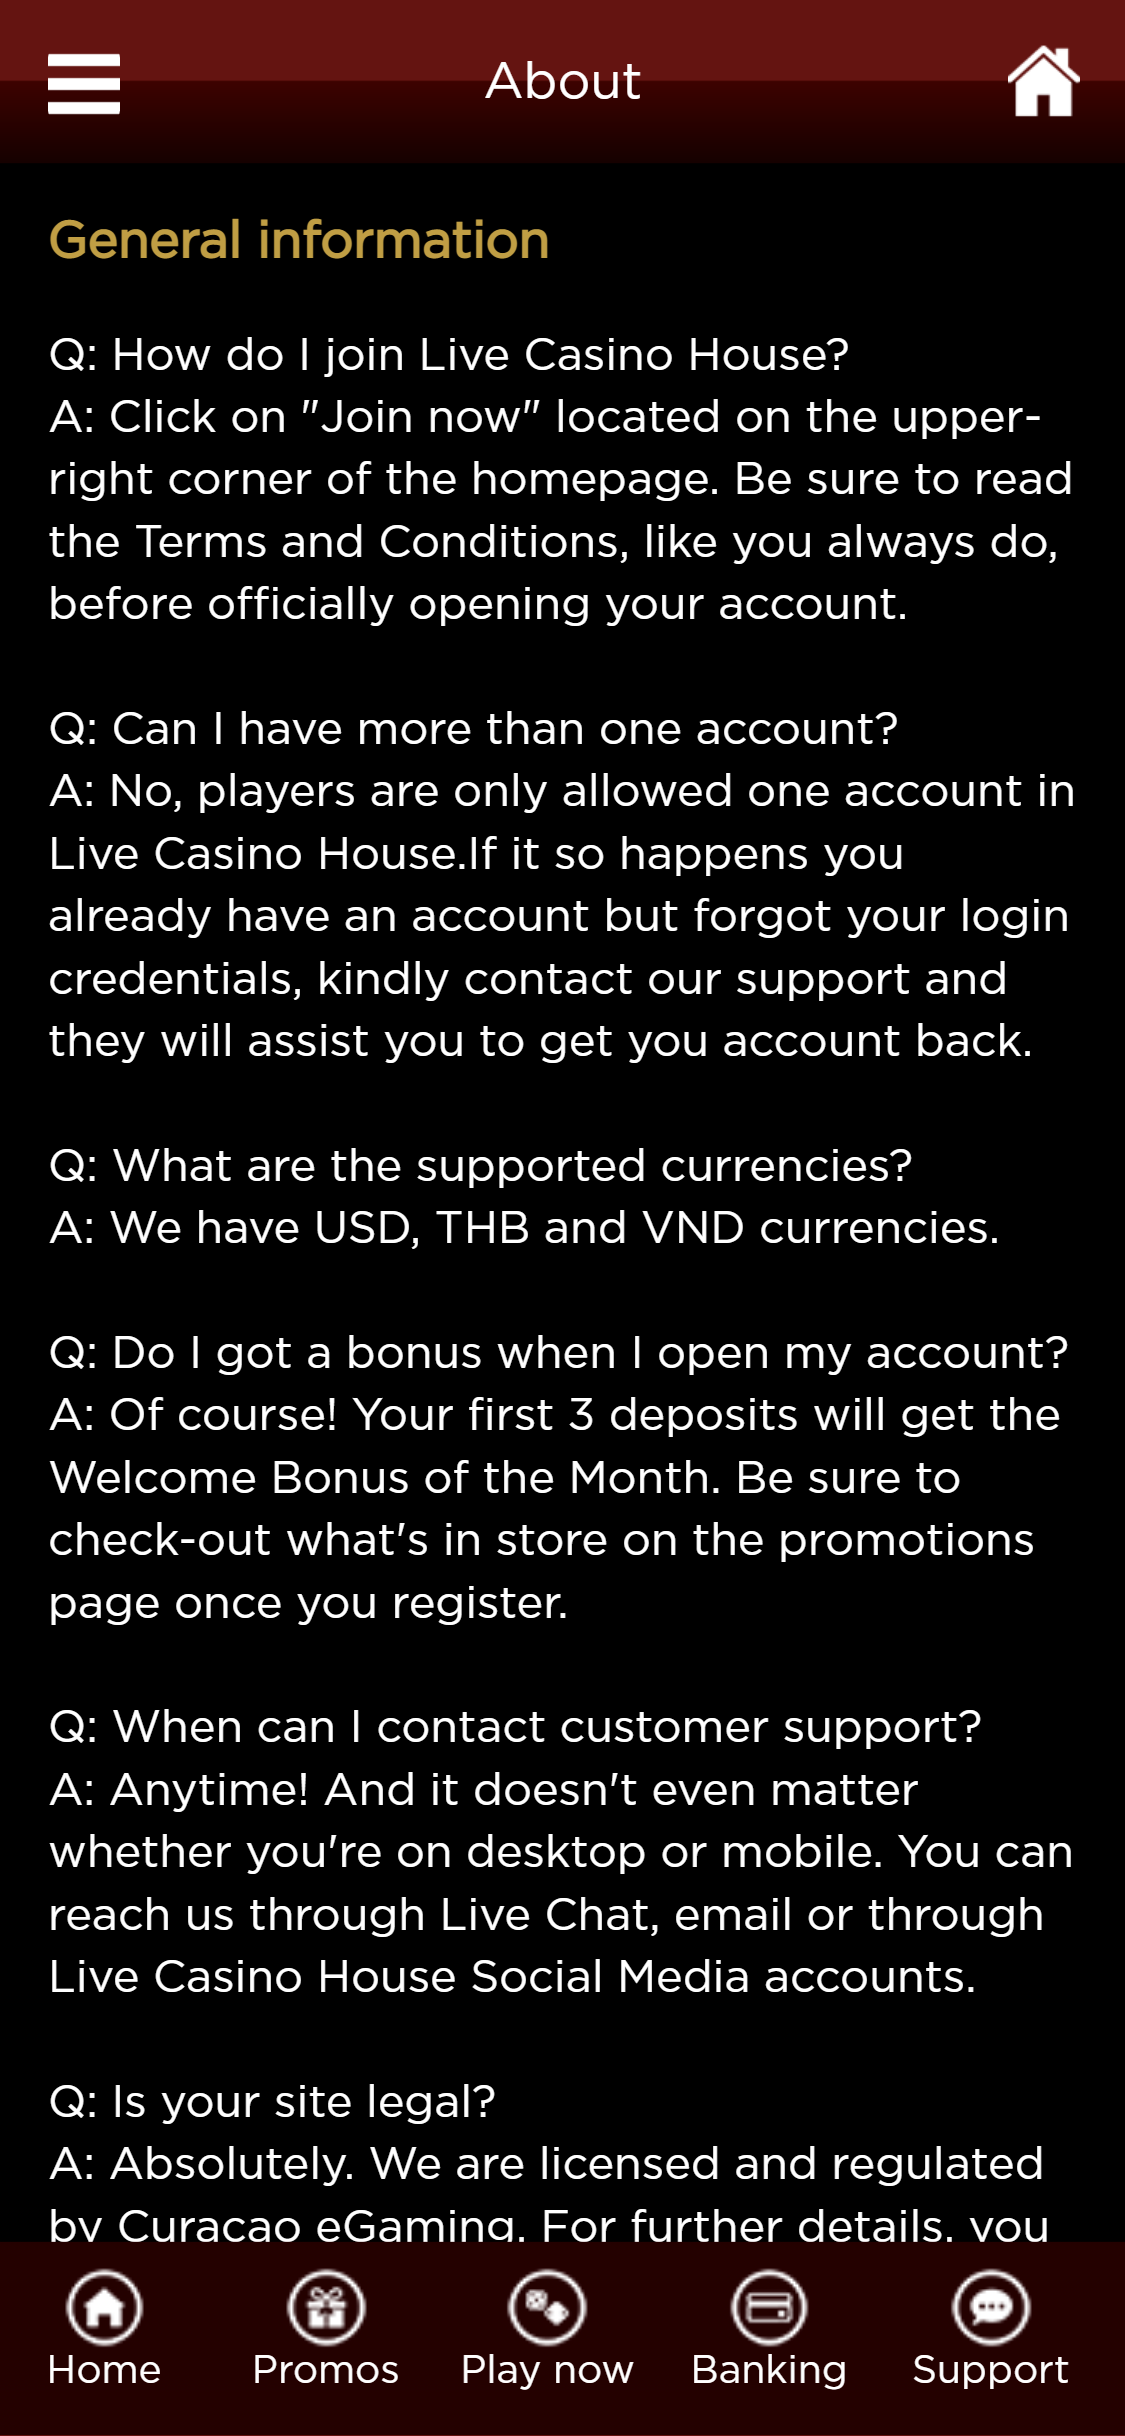 Live Casino House Mobile Support Review